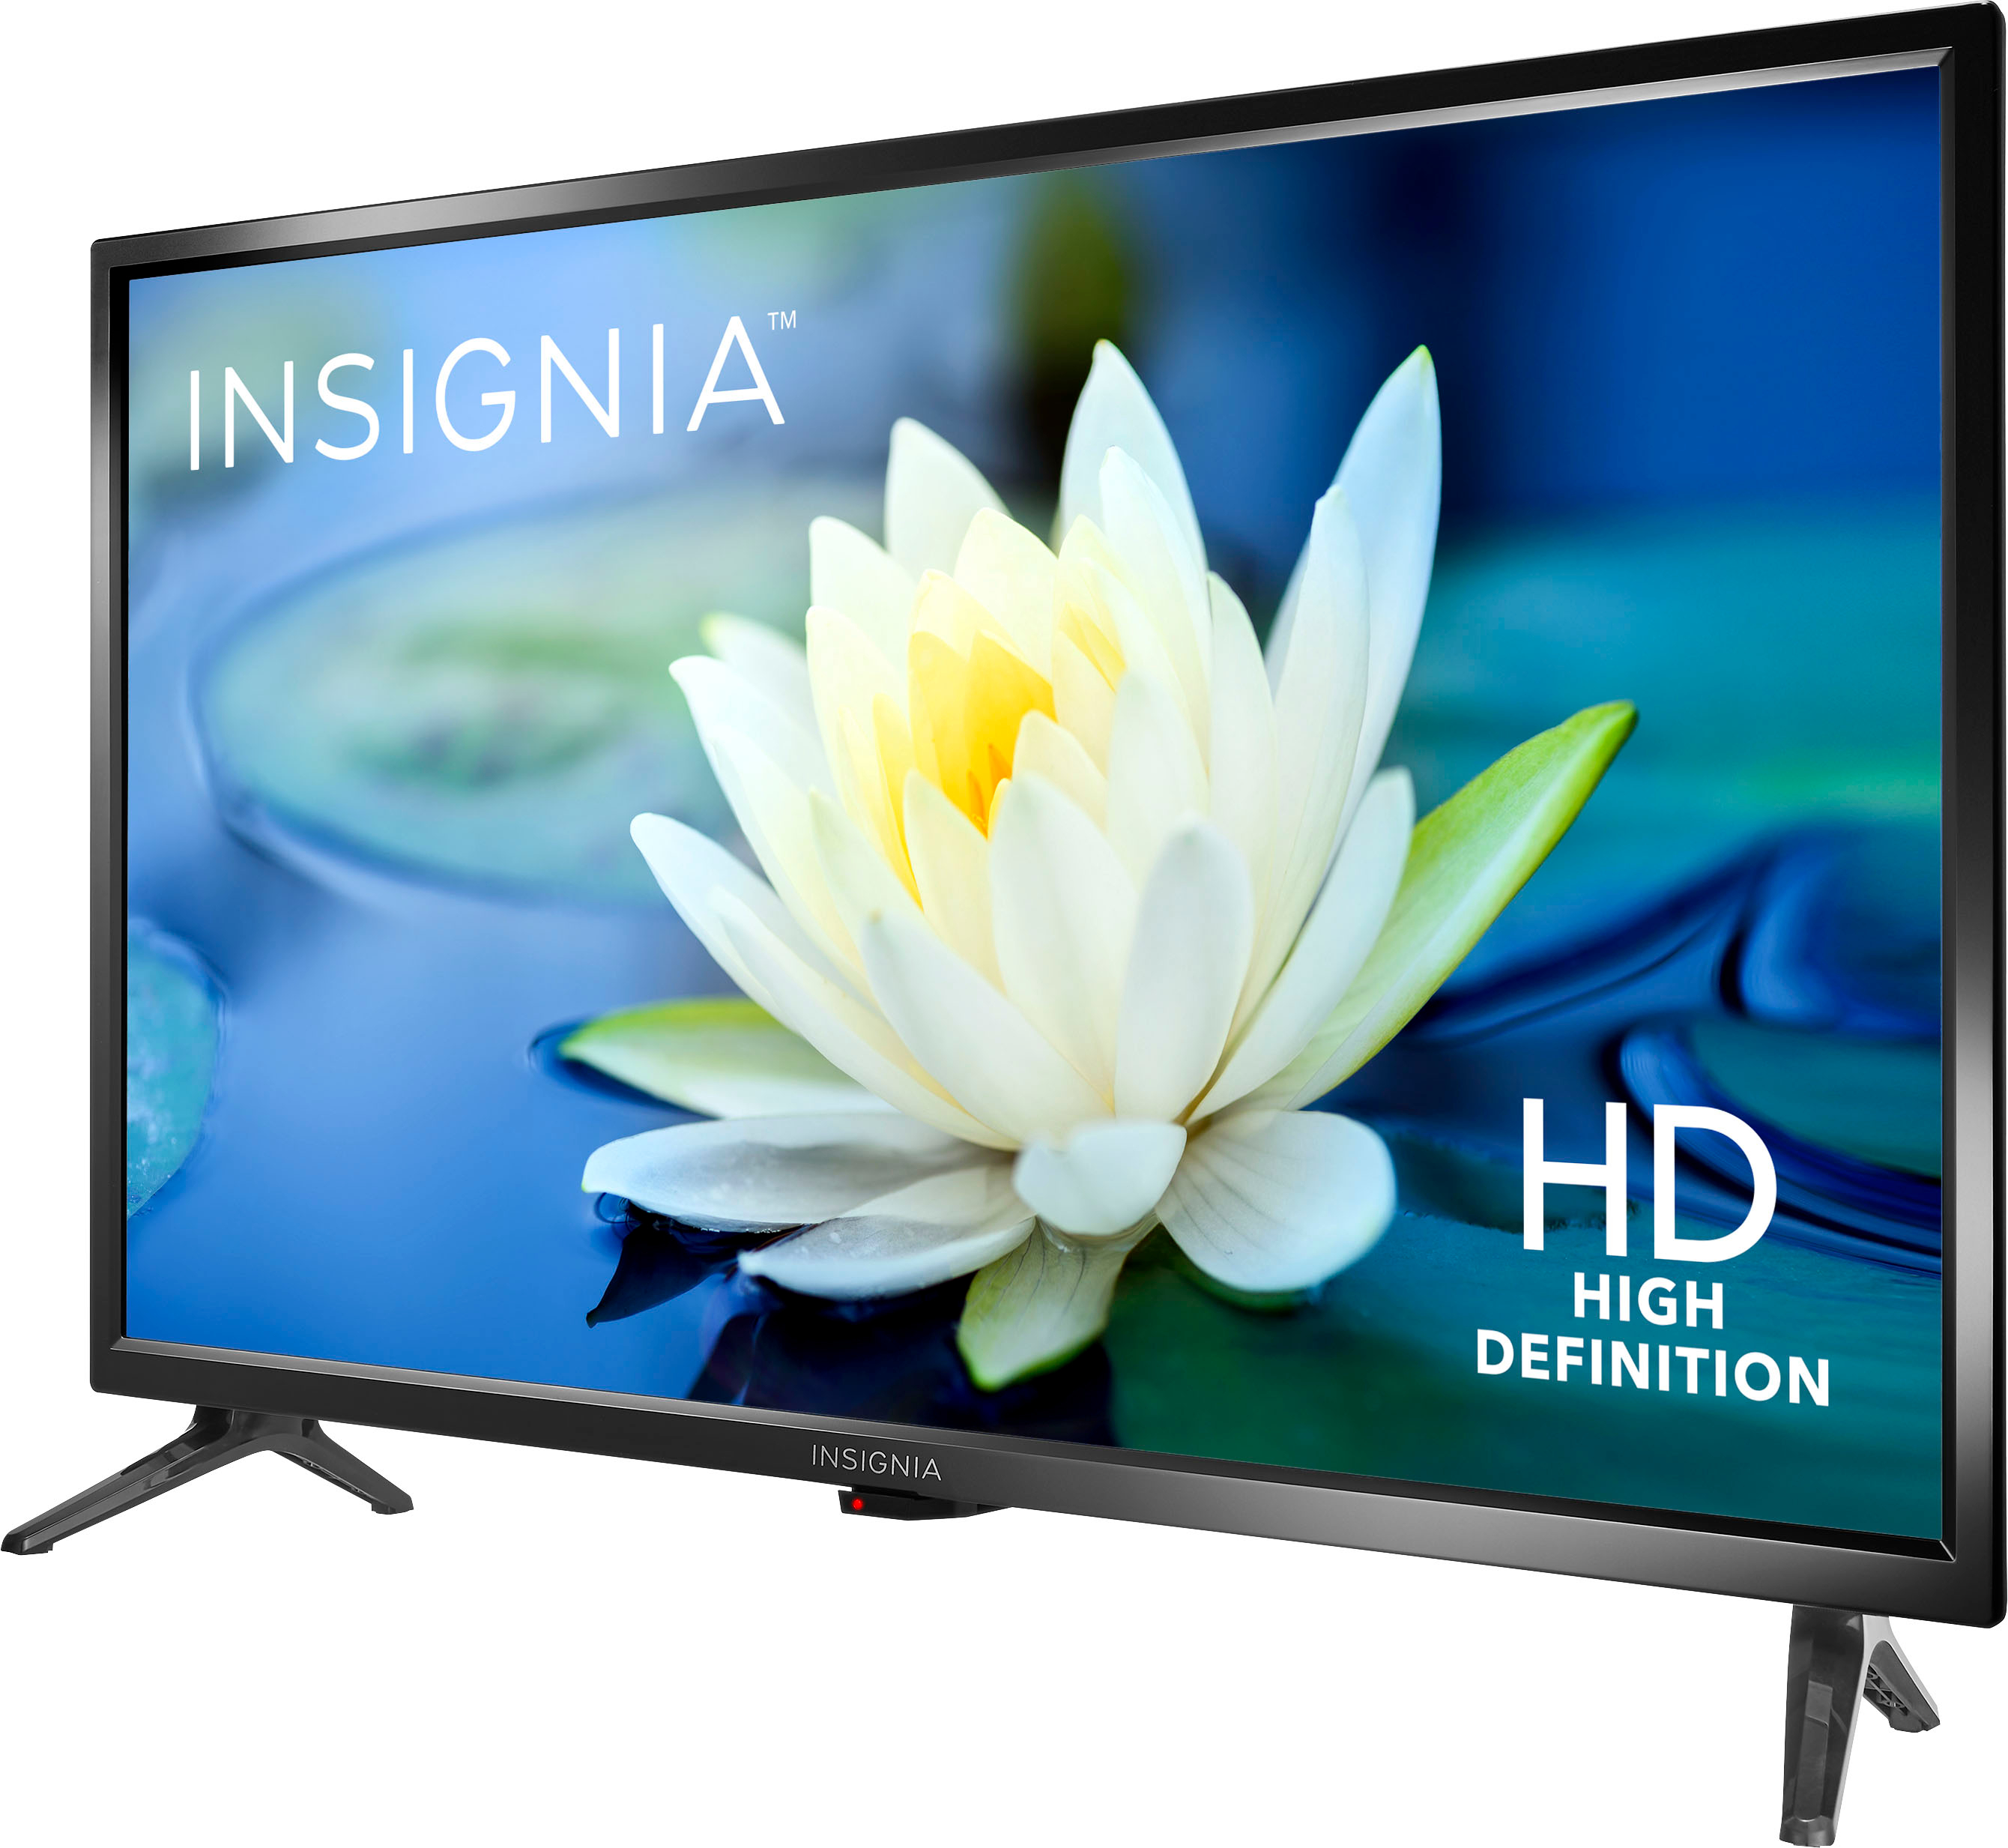 720p HDTV LED Open-Box Excellent: Insignia- 24" Class 